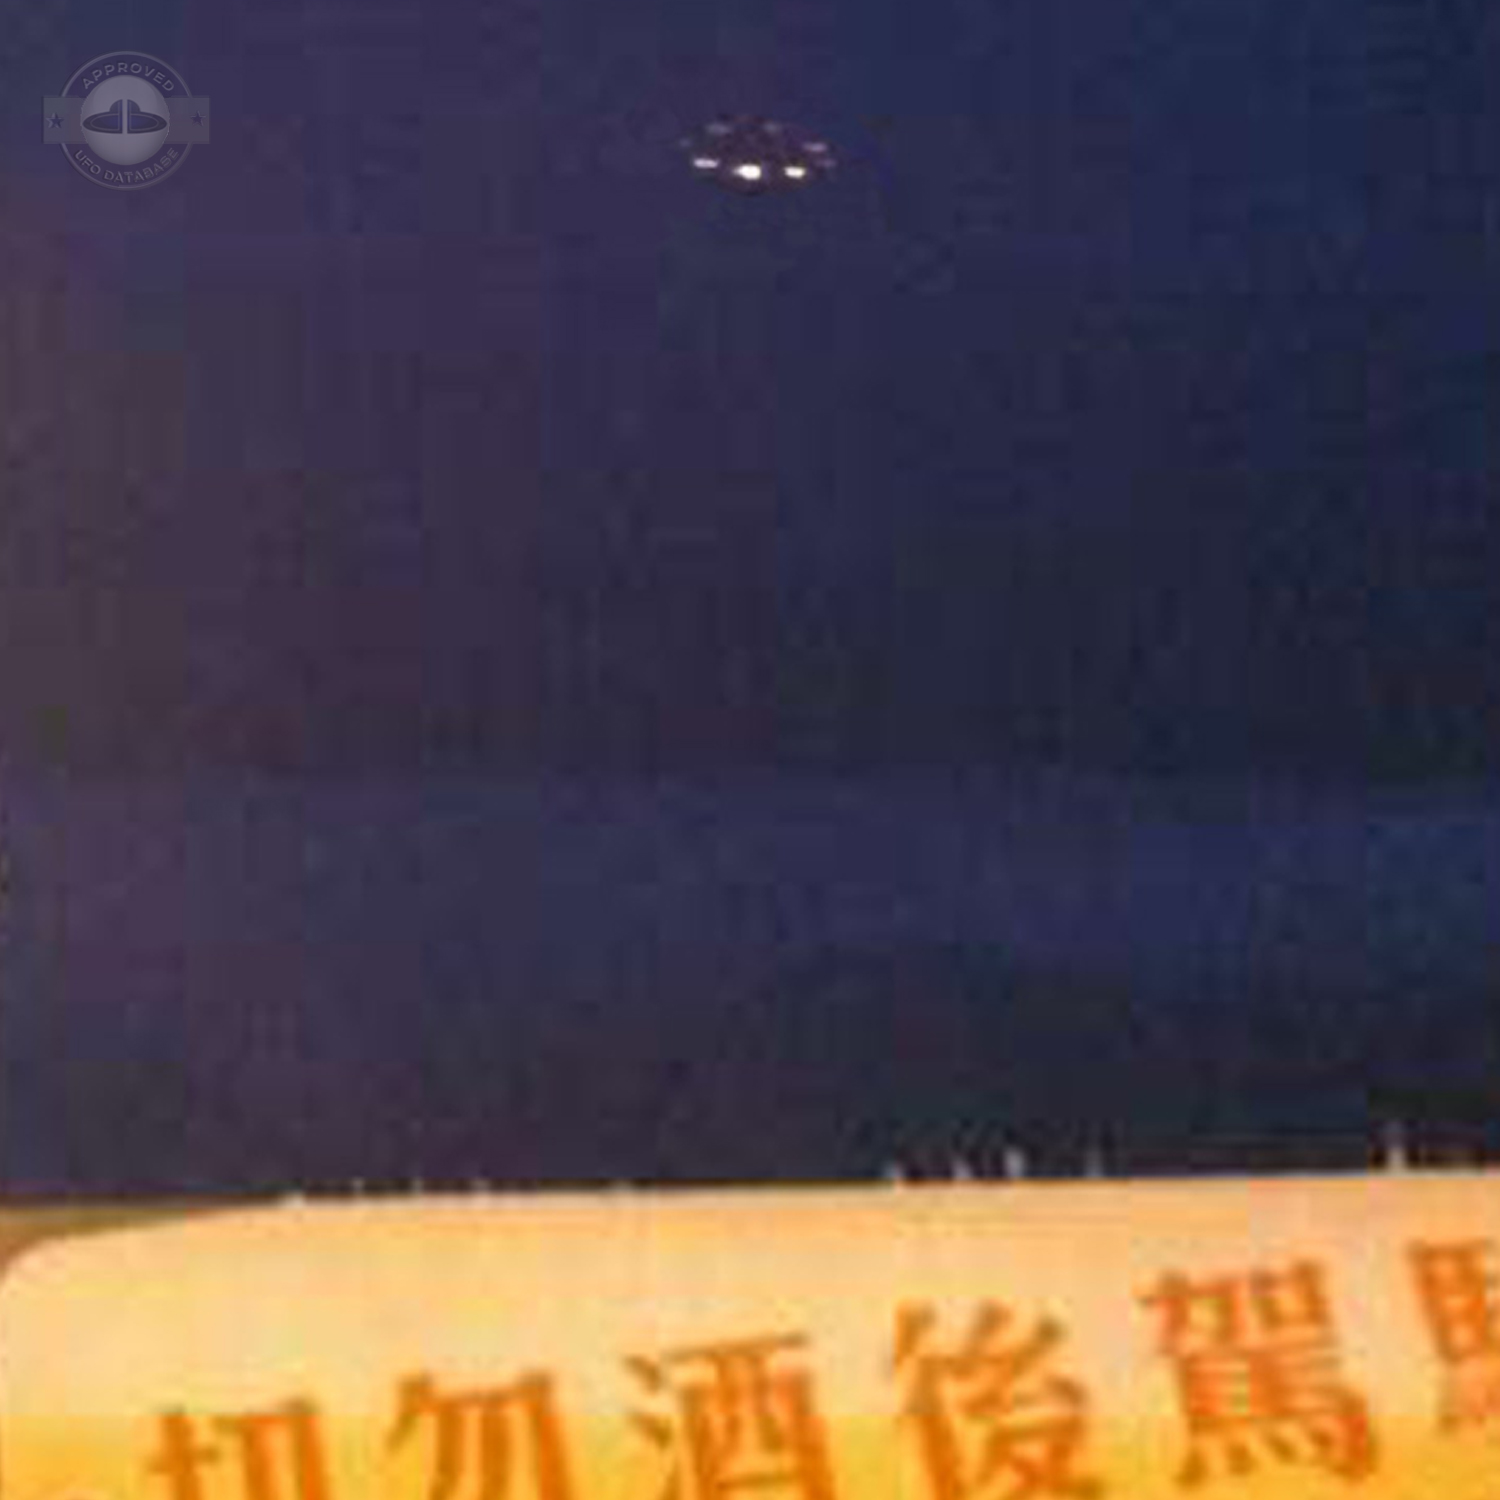 Tai Lam Tunnel, Wan Chai, Happy Valley | Hong Kong UFO picture China UFO Picture #184-3